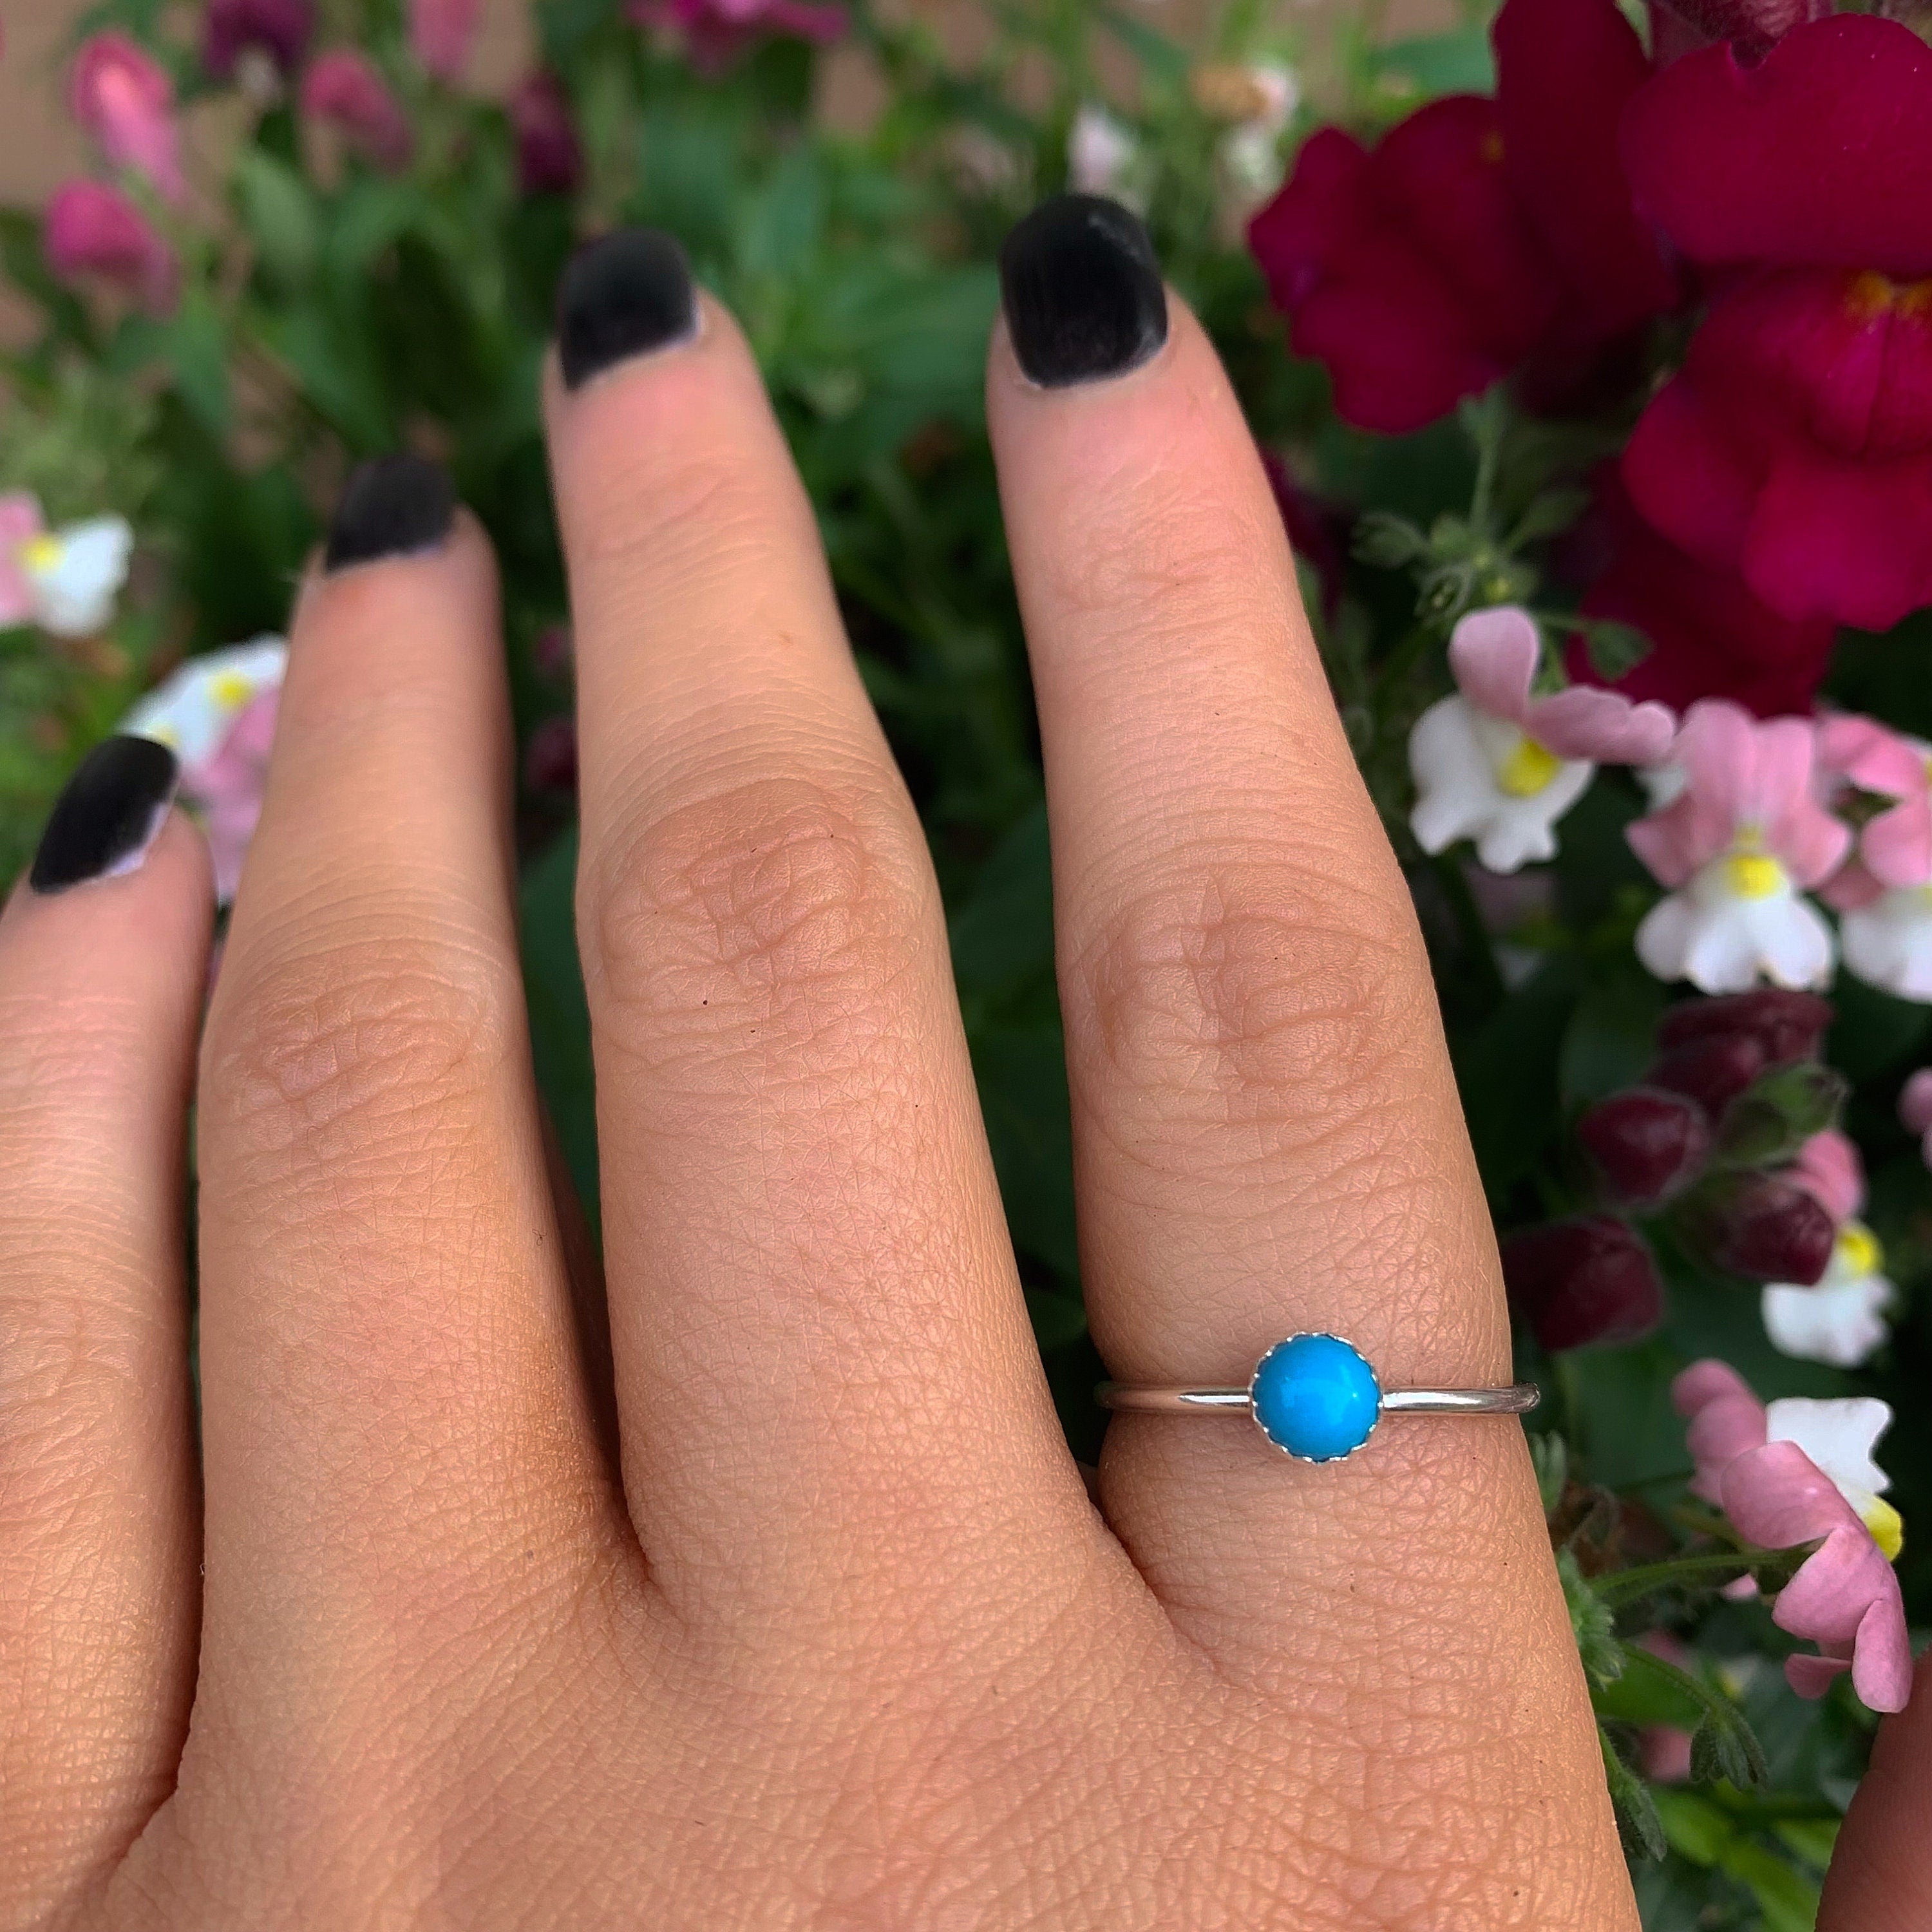 Turquoise Ring - Made to Order 